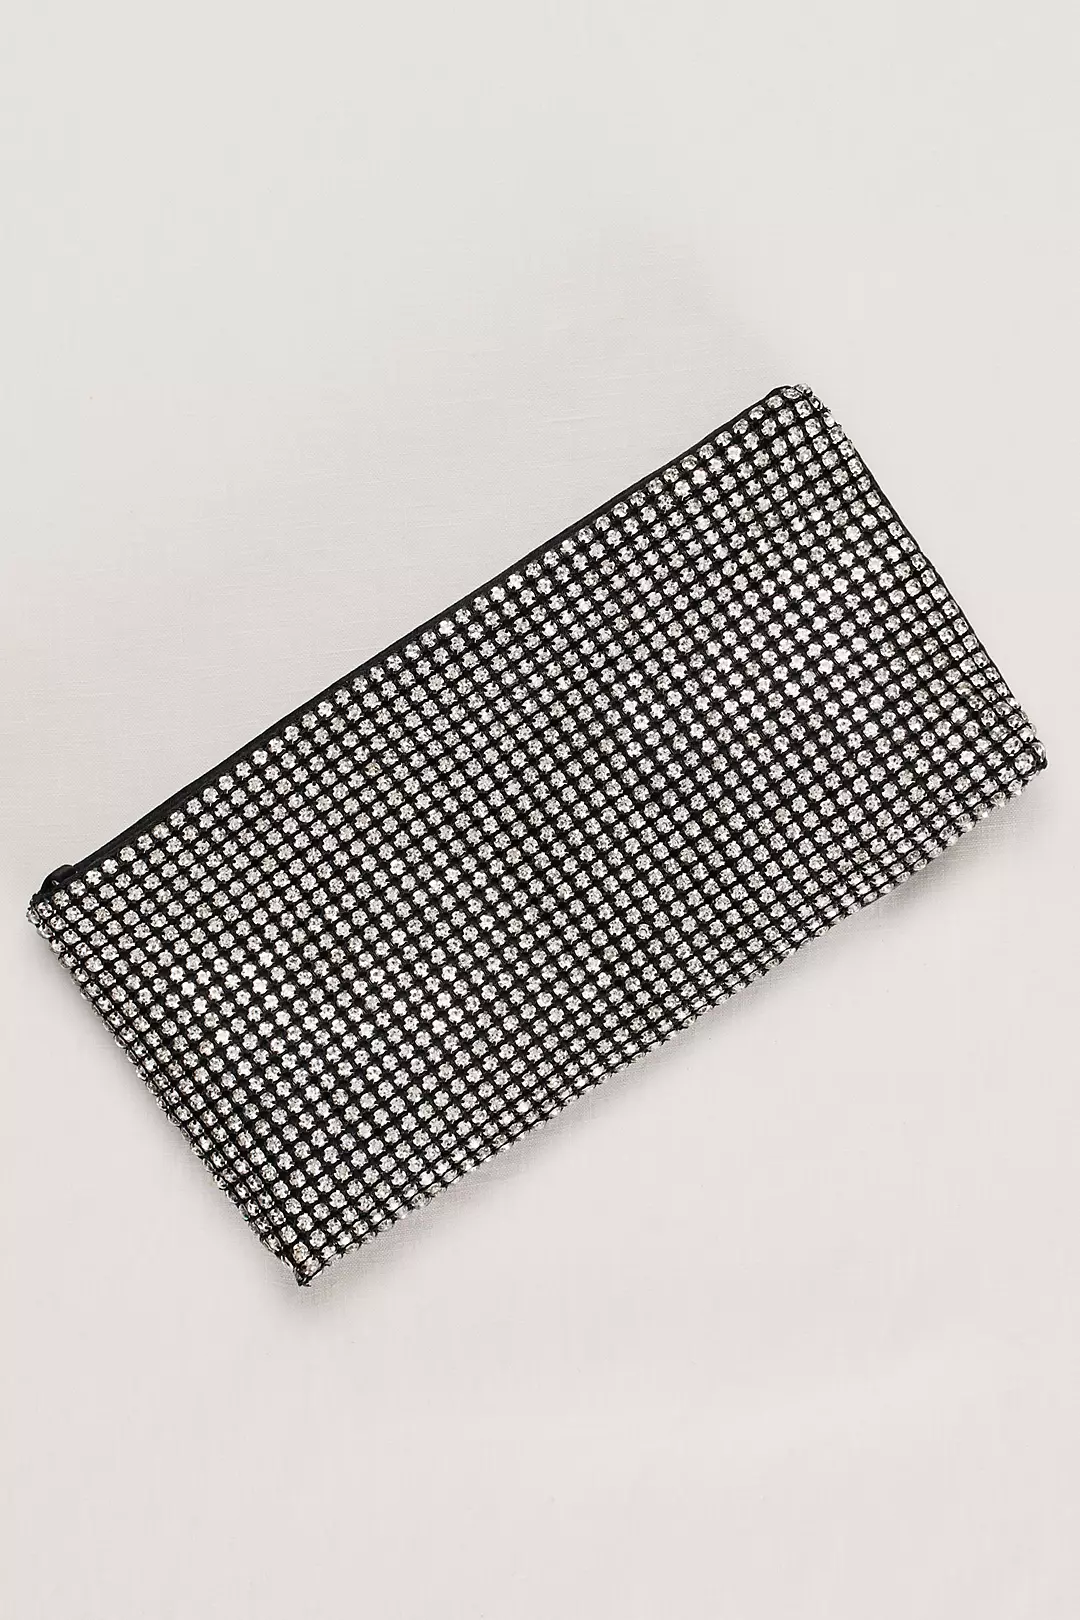 Allover Crystal Soft Clutch Image